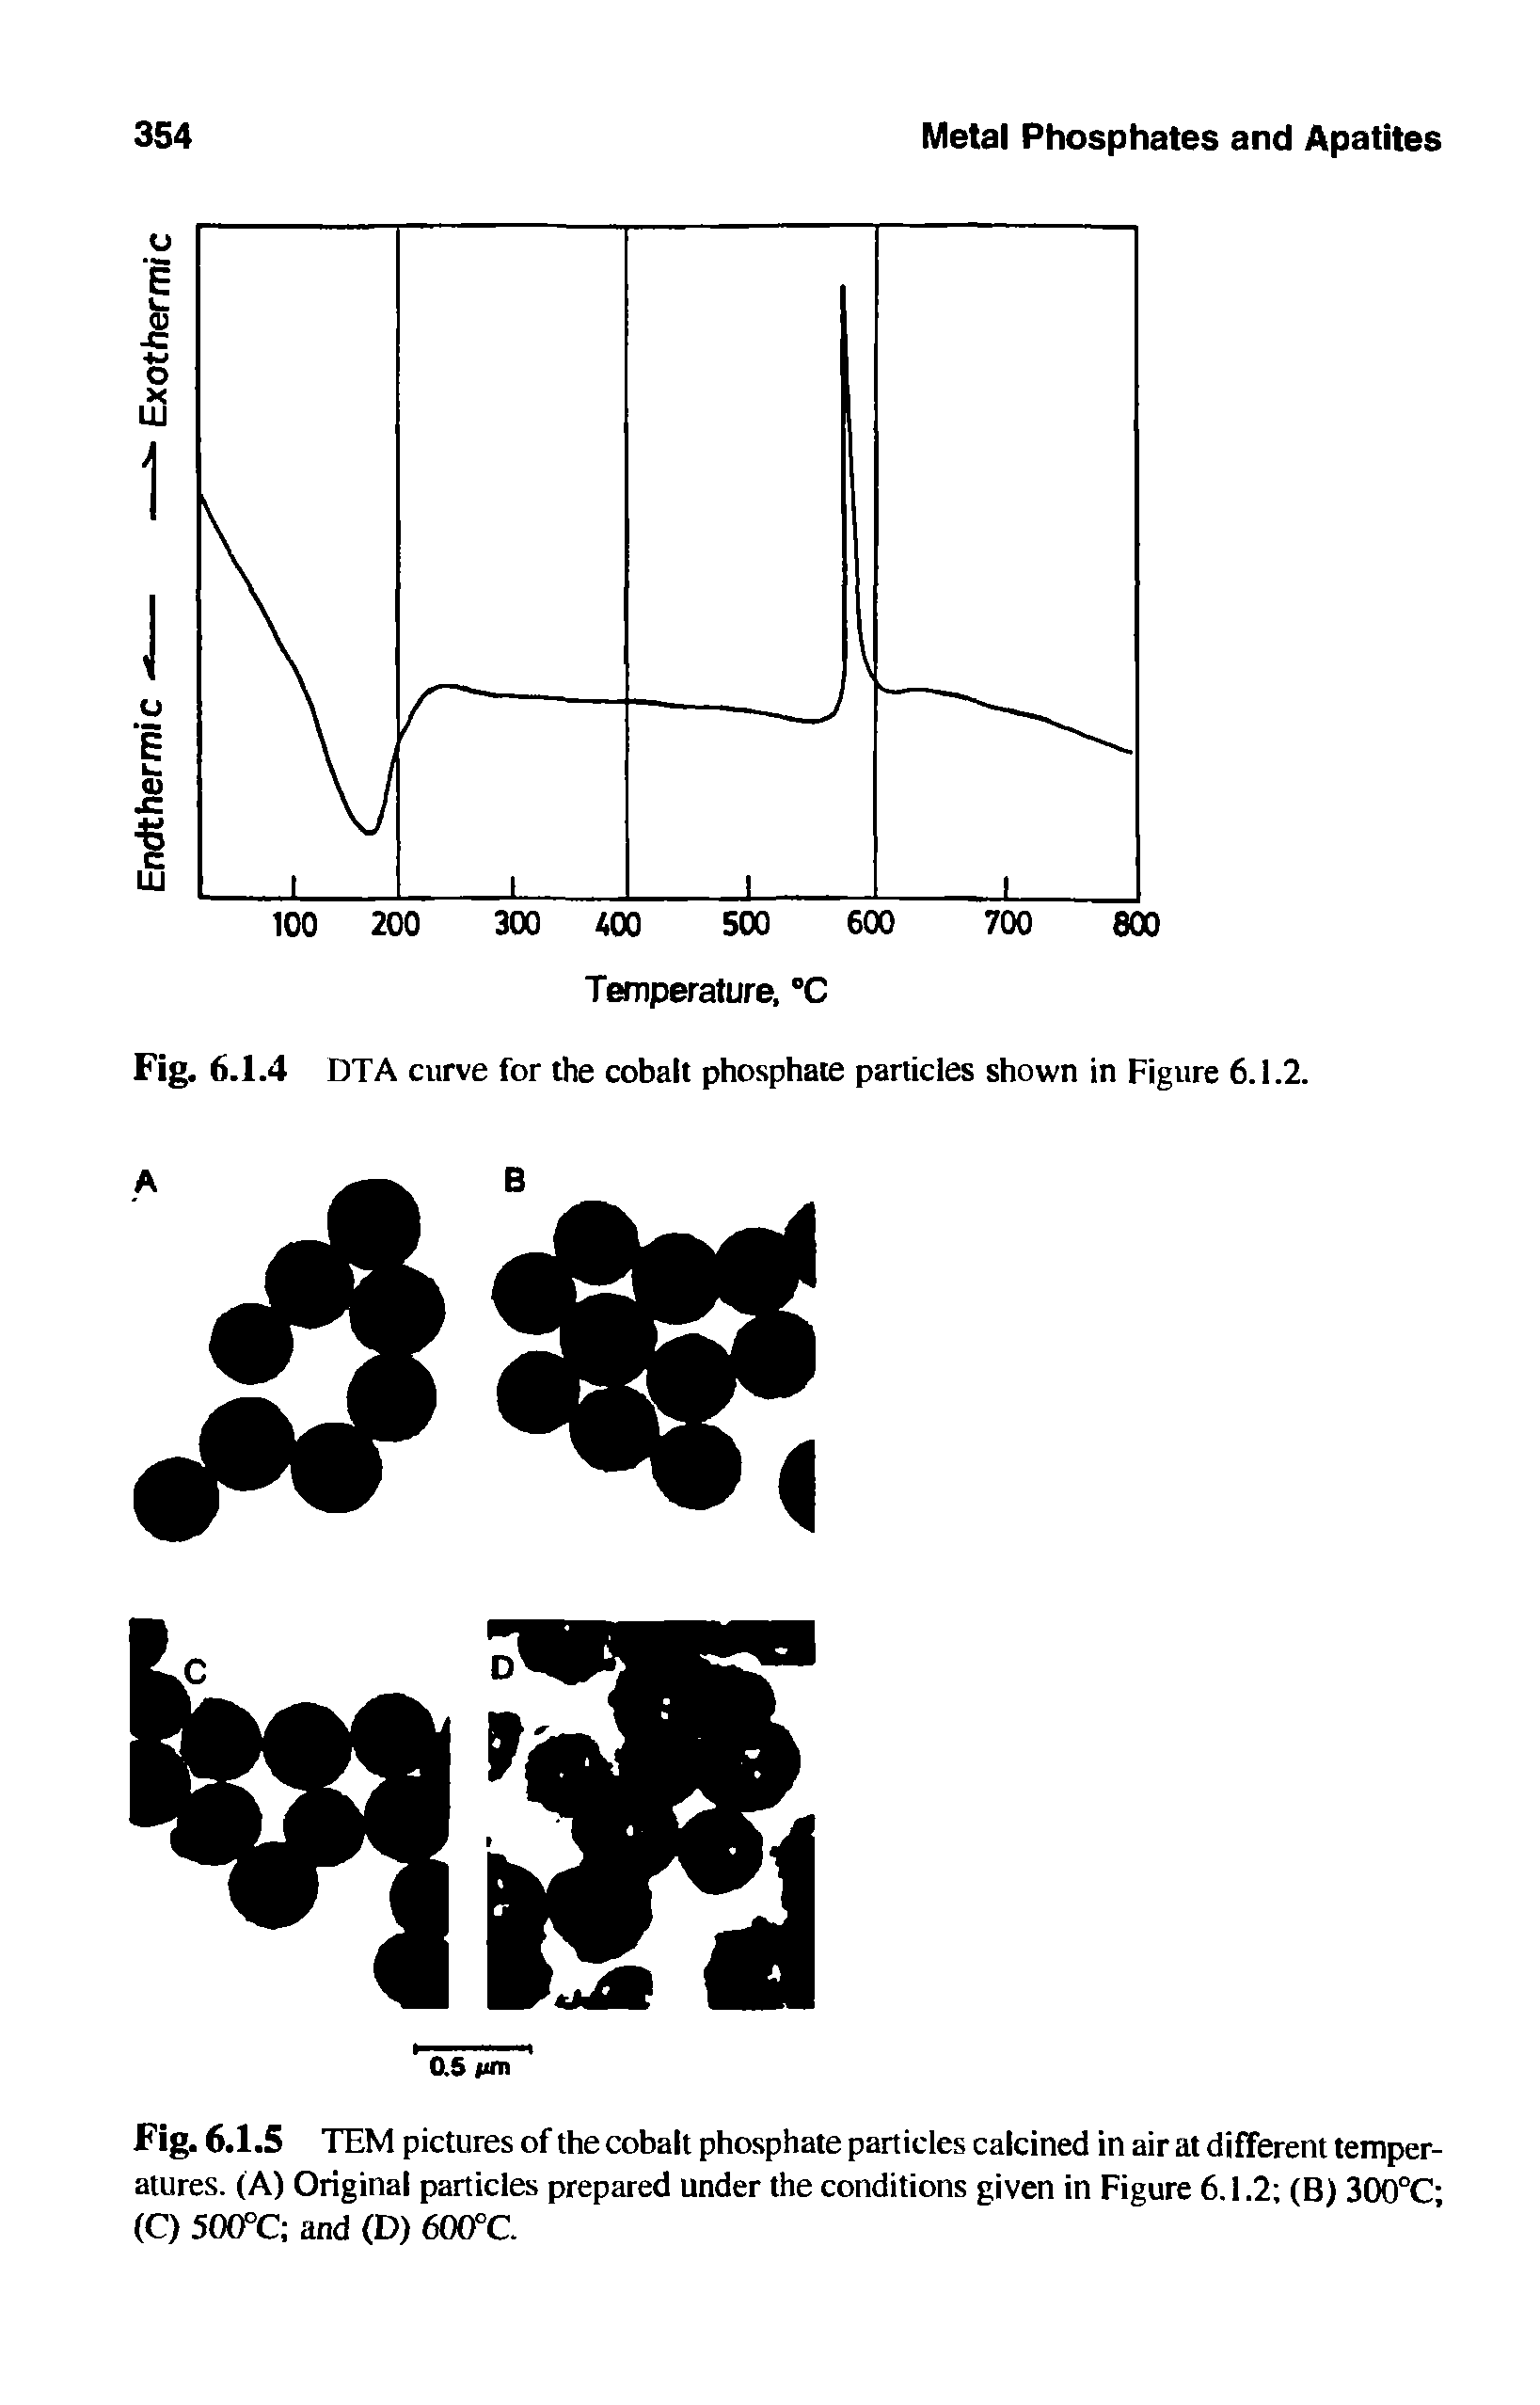 Fig. 6.1.5 TEM pictures of the cobalt phosphate particles calcined in air at different temperatures. (A) Original particles prepared under the conditions given in Figure 6.1.2 (B) 300°C (C) 500°C and (D) 600°C.